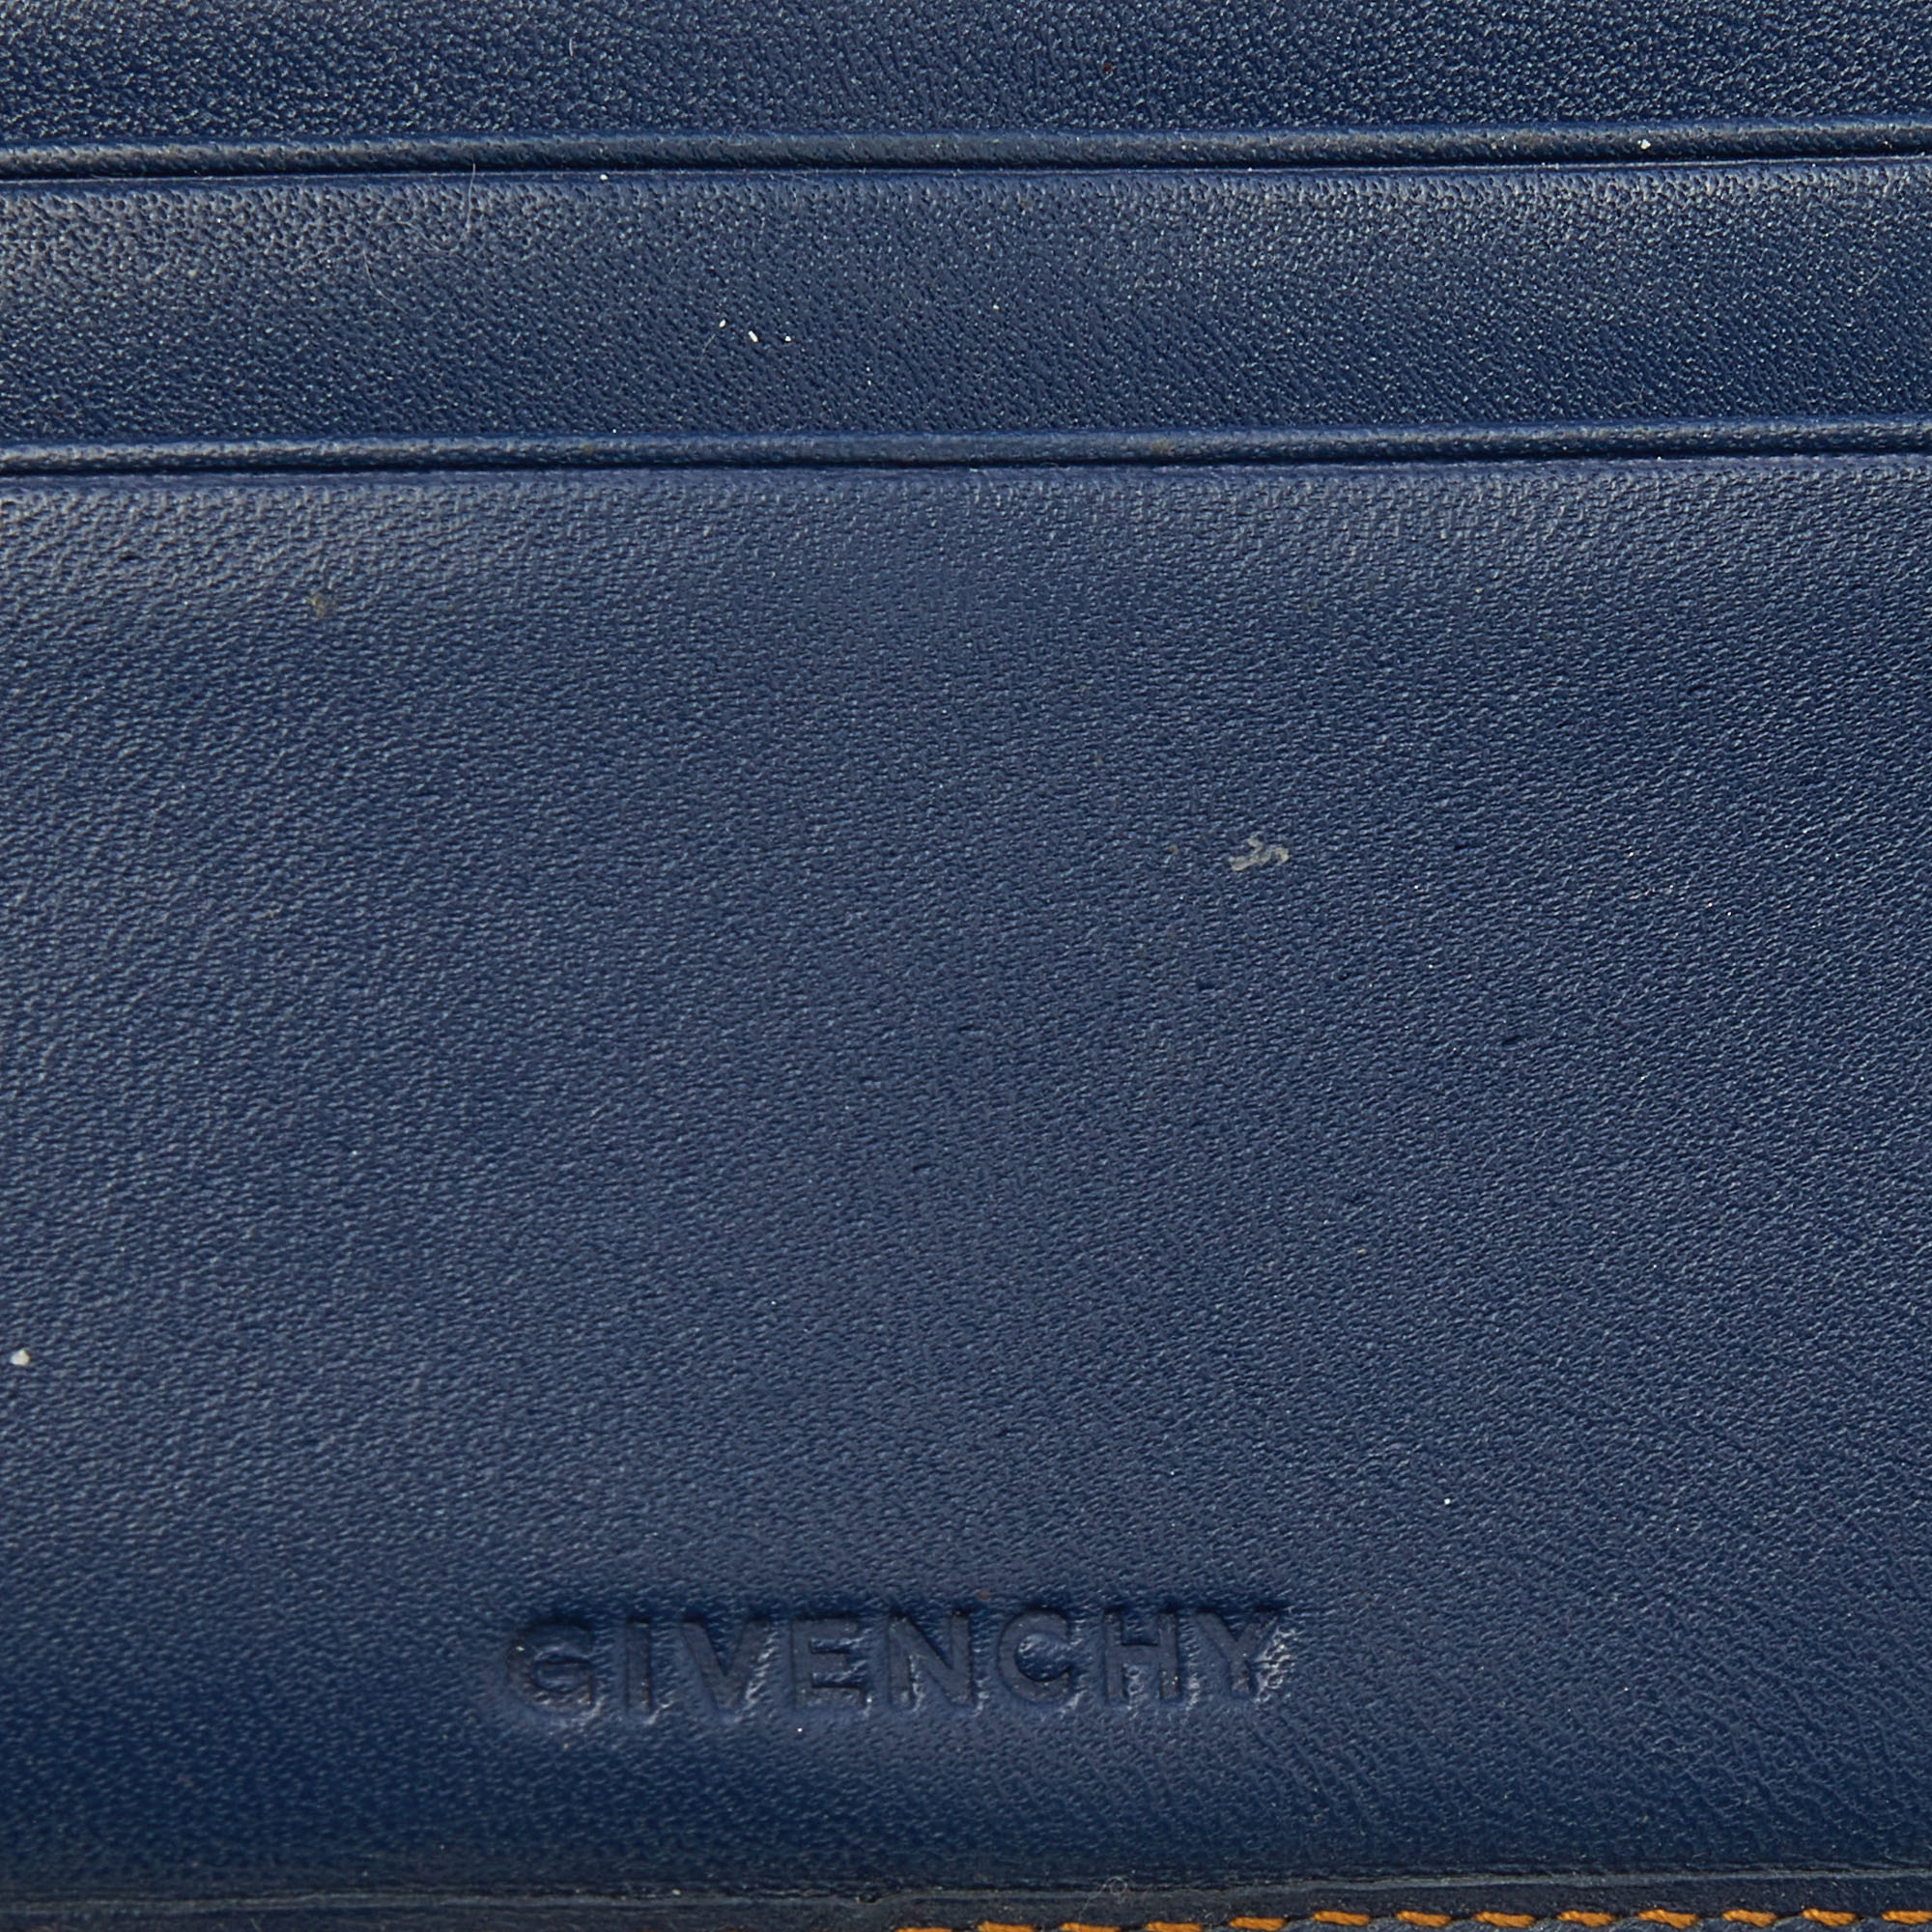 Givenchy Blue Denim An Leather Trifold Wallet